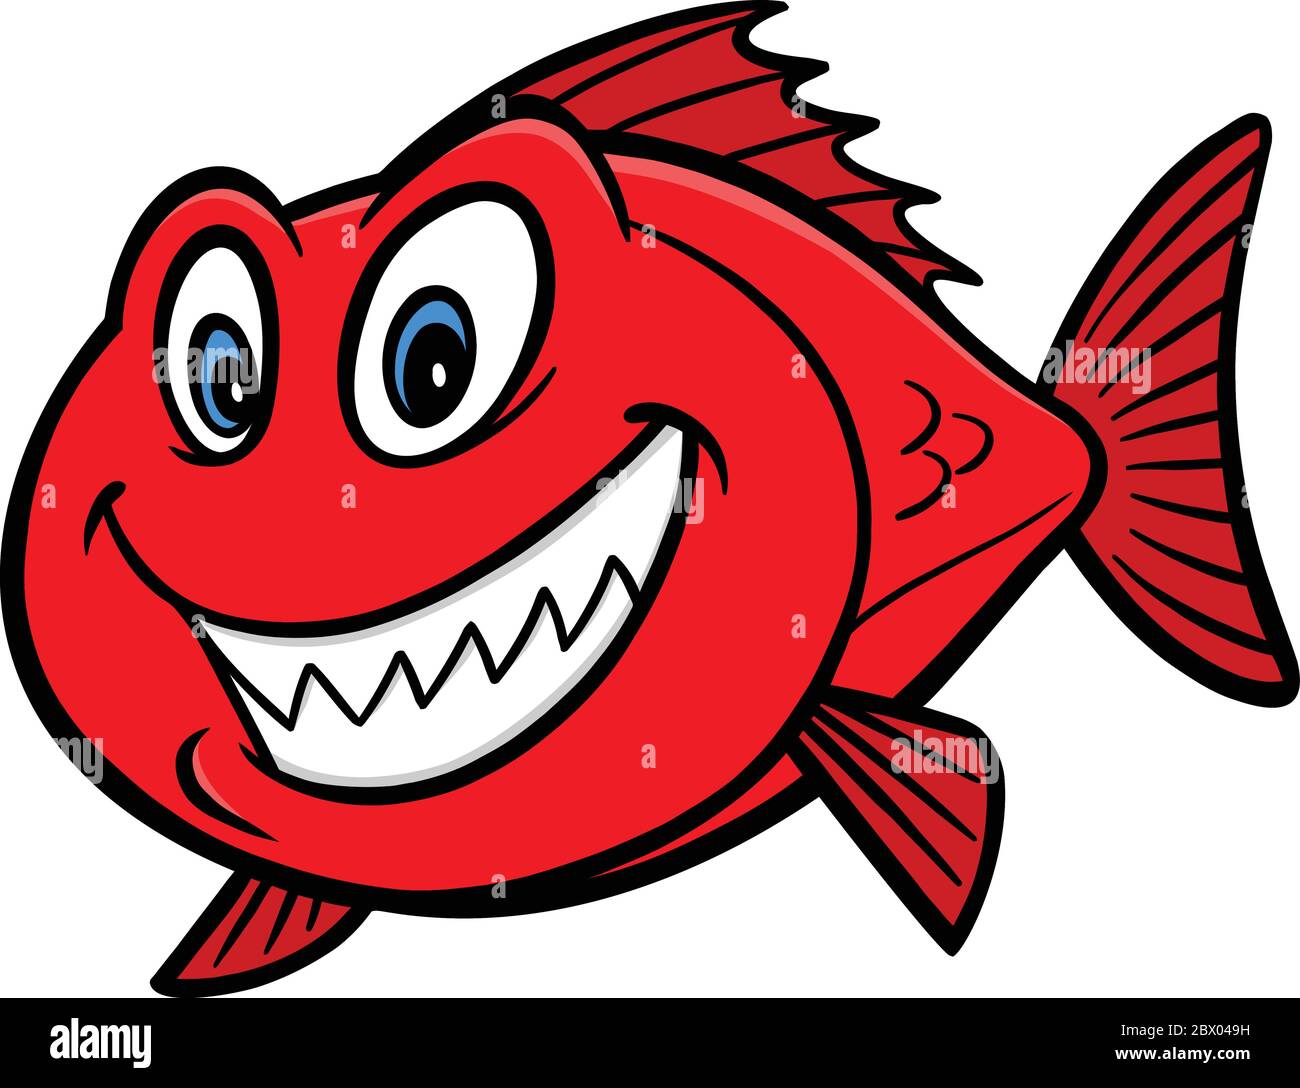 Red Snapper- A Cartoon Illustration of a Red Snapper. Stock Vector